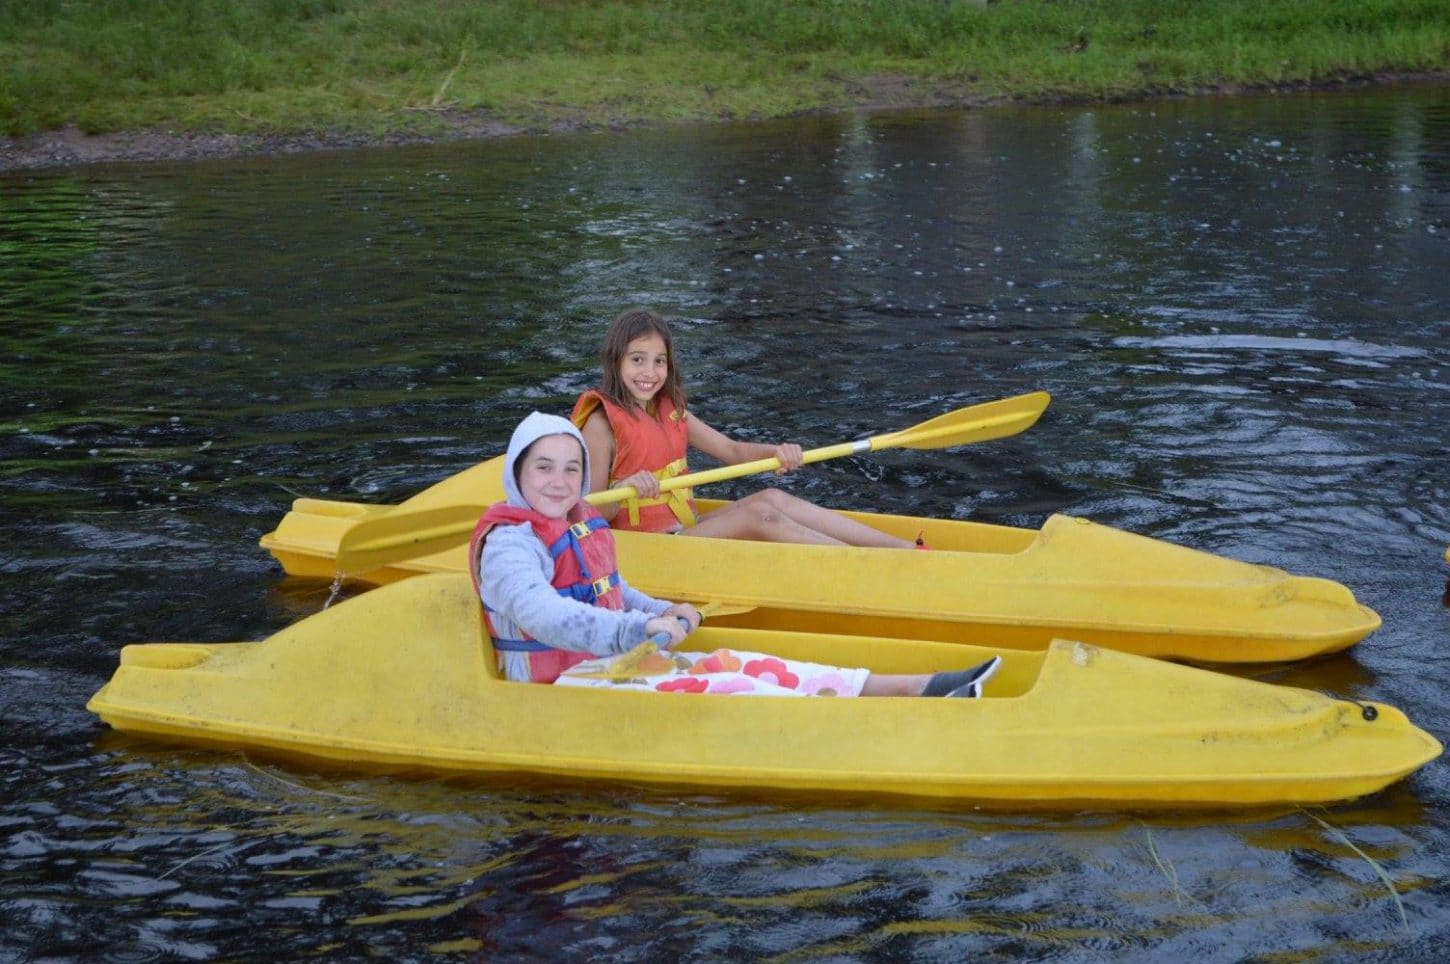 Two WeHaKee campers having fun on the lake in their yellow kayaks